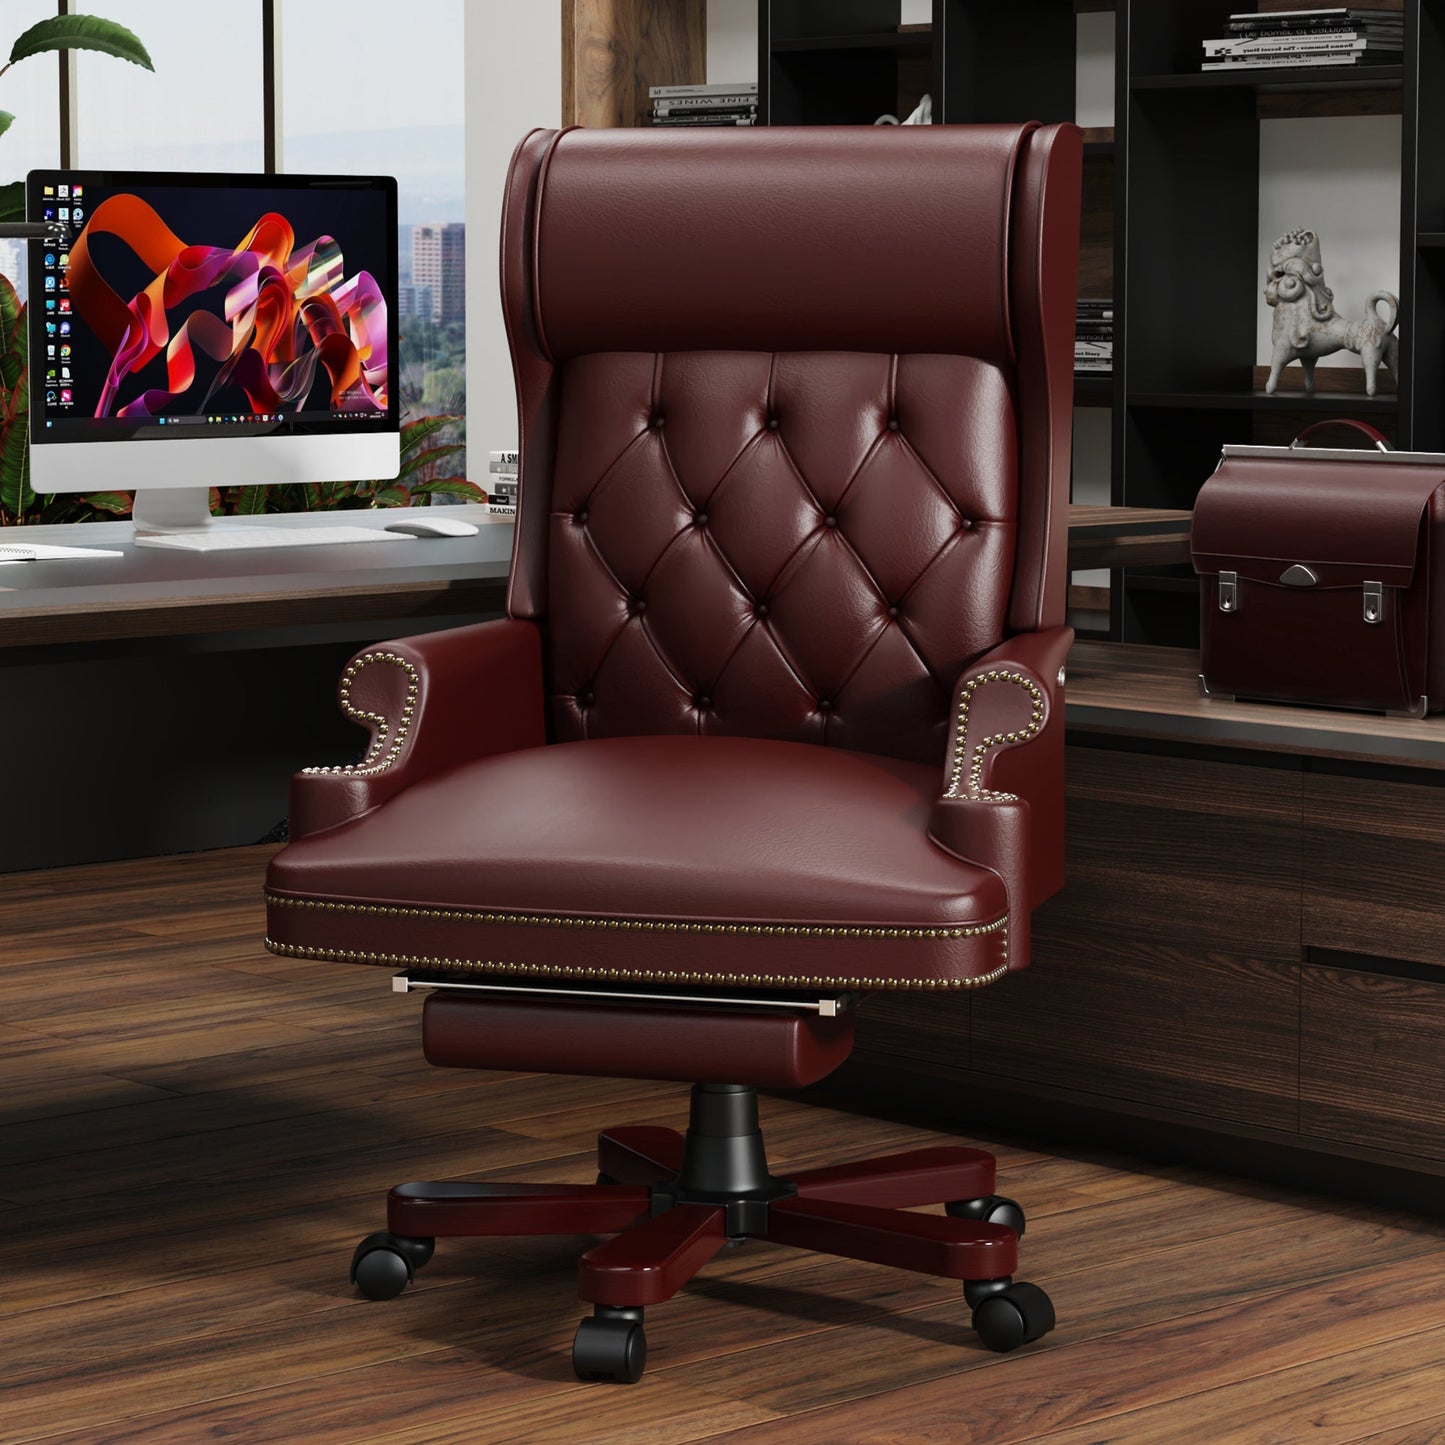 330LBS Executive Office Chair with Footstool, Ergonomic Design High Back Reclining Comfortable Desk Chair -  
Burgundy